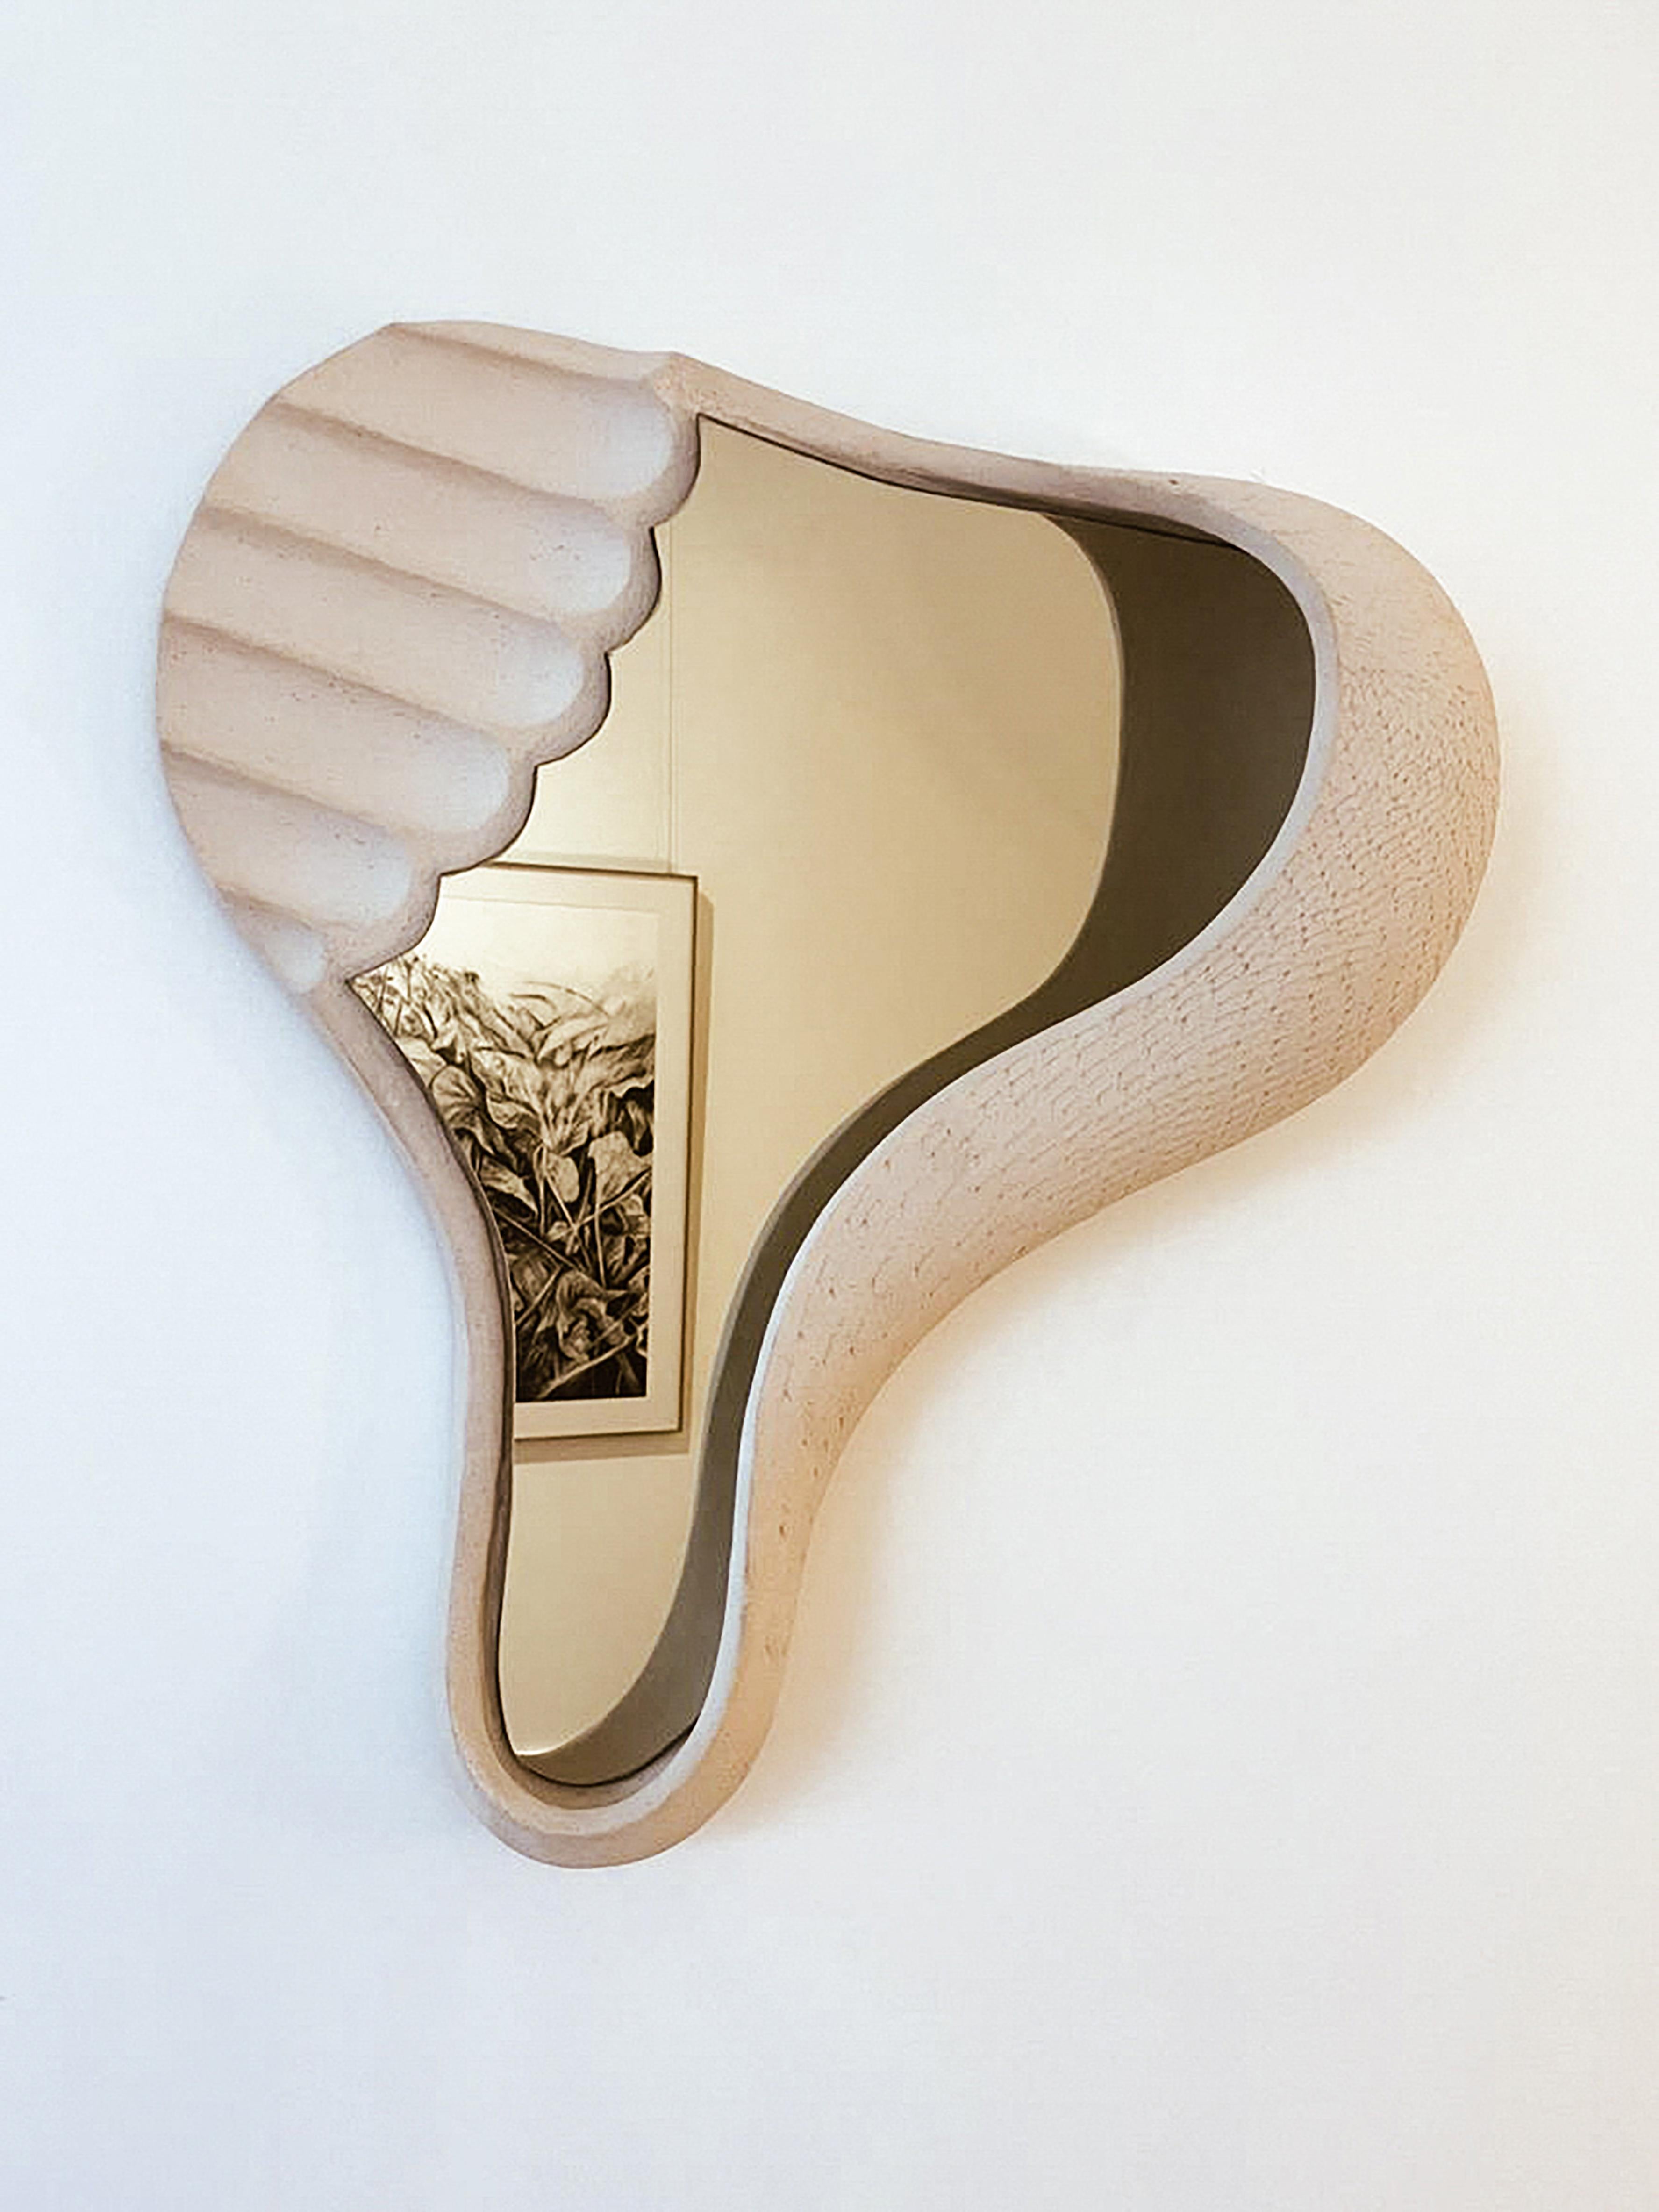 Hand-Crafted Contemporary Ceramic DUNE 01 Mirror Handcrafted by Jan Ernst For Sale